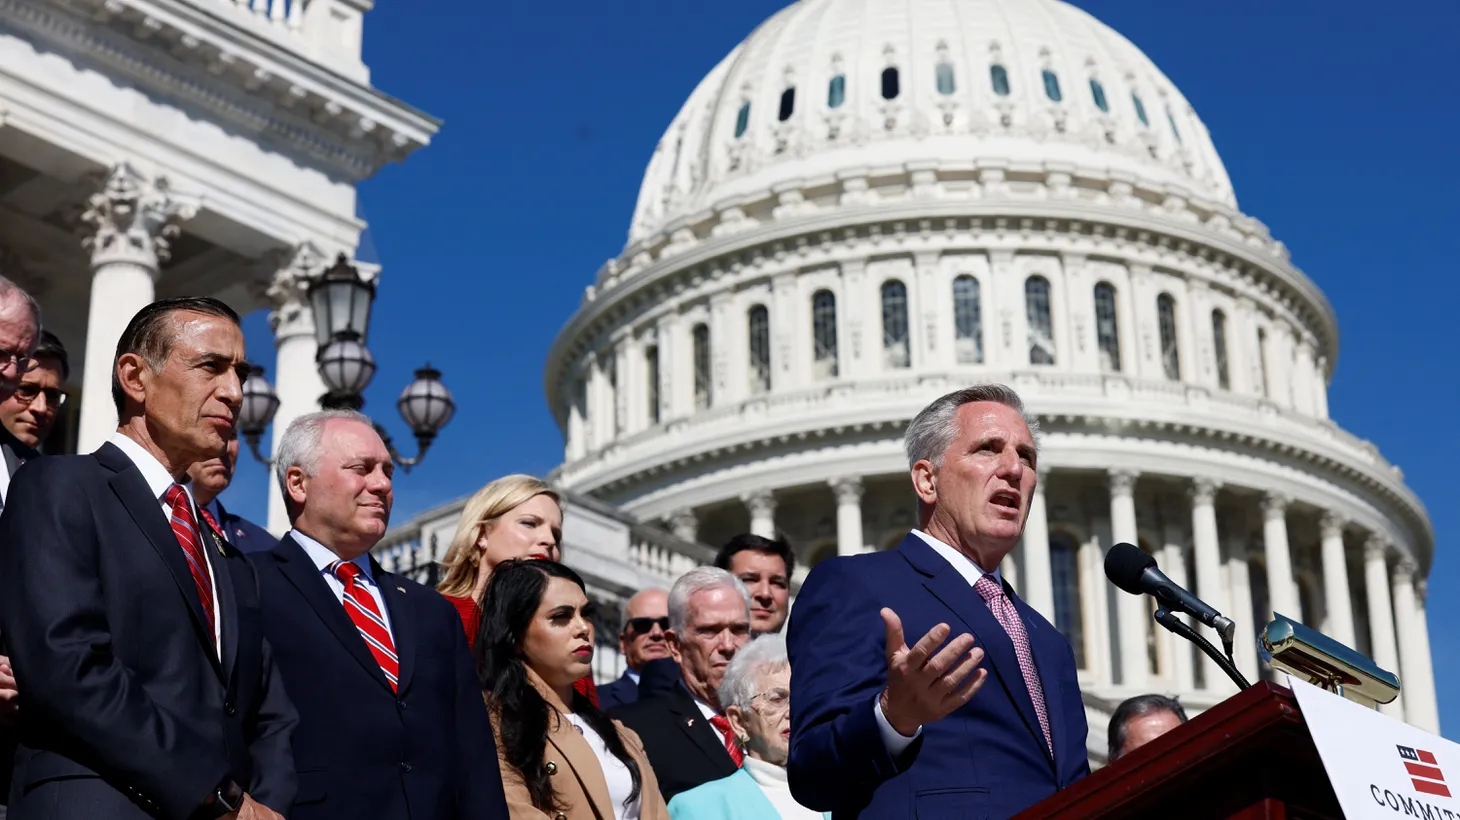 House Minority Leader Kevin McCarthy (R-CA) speaks during a news conference about the House Republicans’ "commitment to America" outside the United States Capitol building in Washington, D.C., U.S., on September 29, 2022.